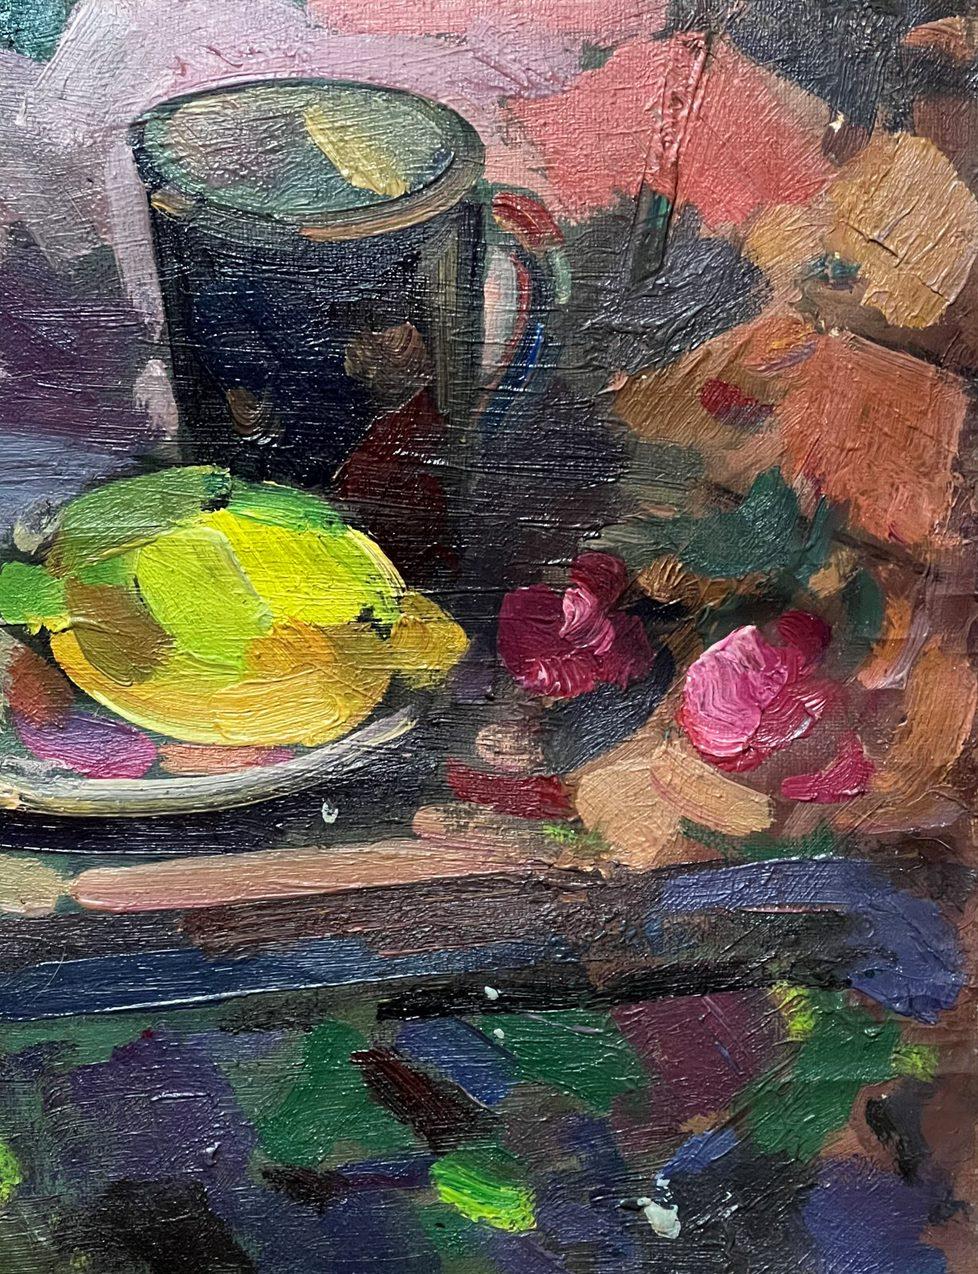 Artist: Peter Tovpev
Work: Original oil painting, handmade artwork, one of a kind 
Medium: Oil on Canvas 
Year: 2020
Style: Impressionism
Title: Still Life for Tea
Size: 31.5